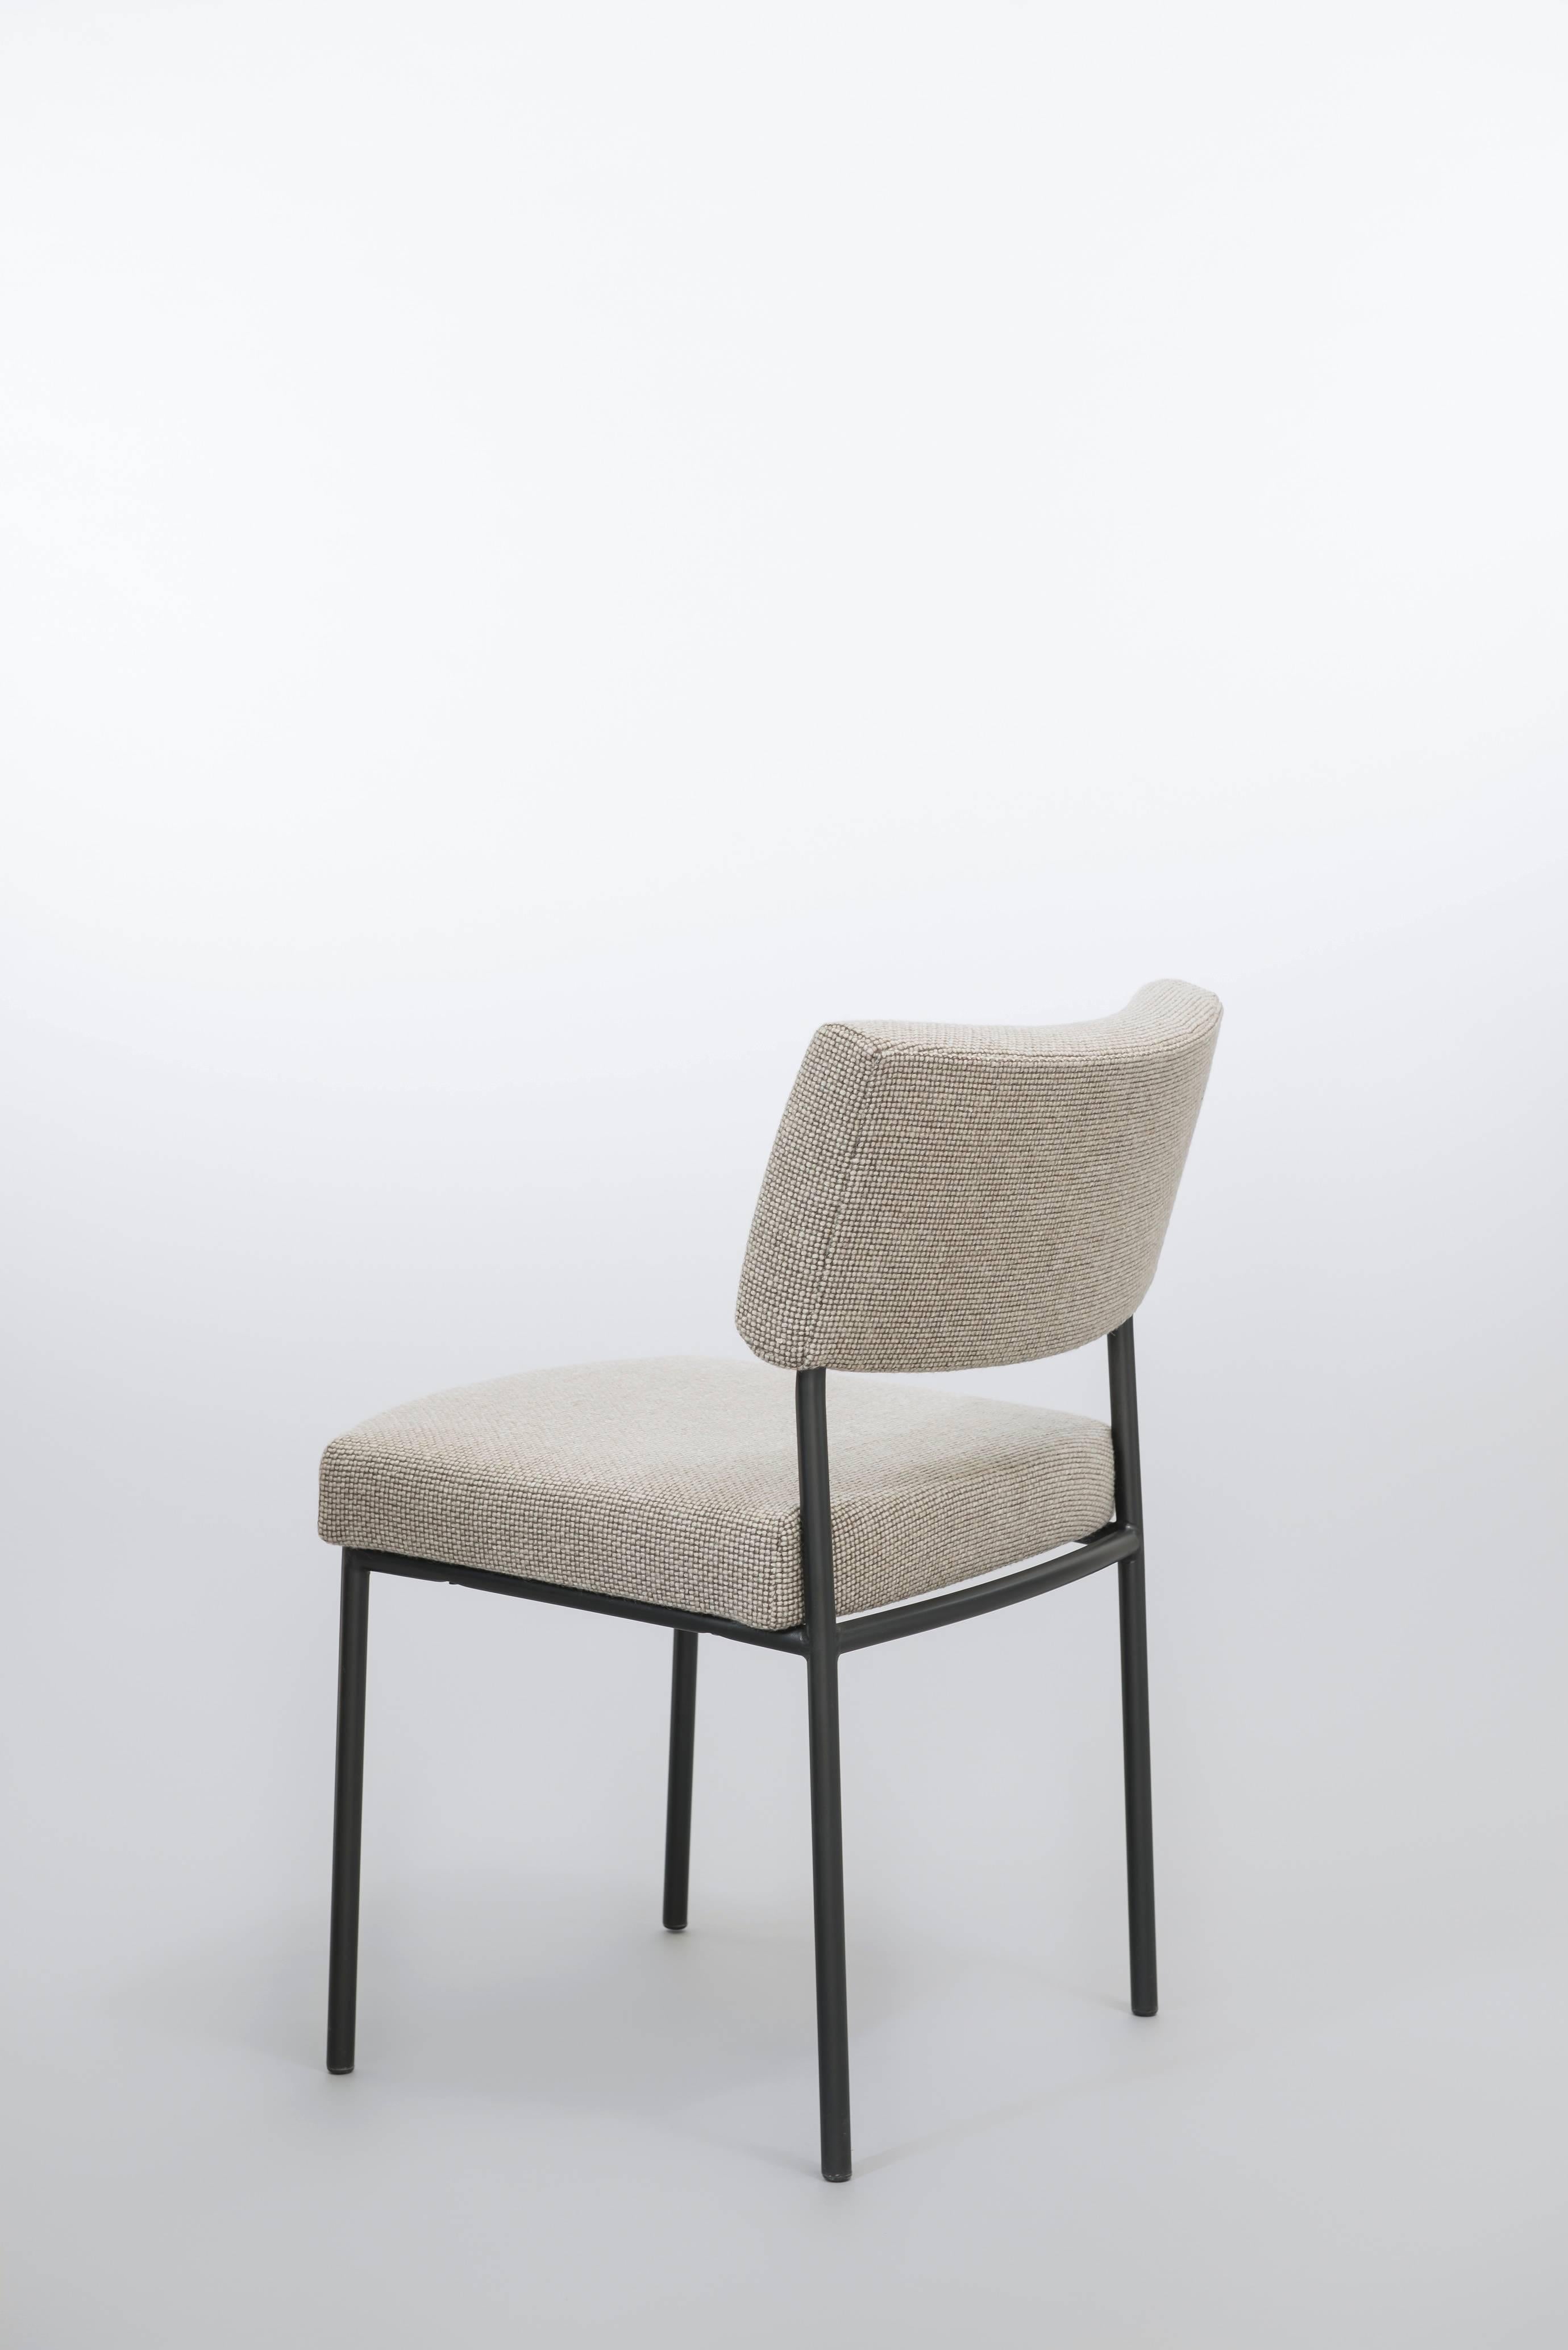 Set of four chairs 762 by Joseph-André Motte.
Steiner edition 1957-1958.